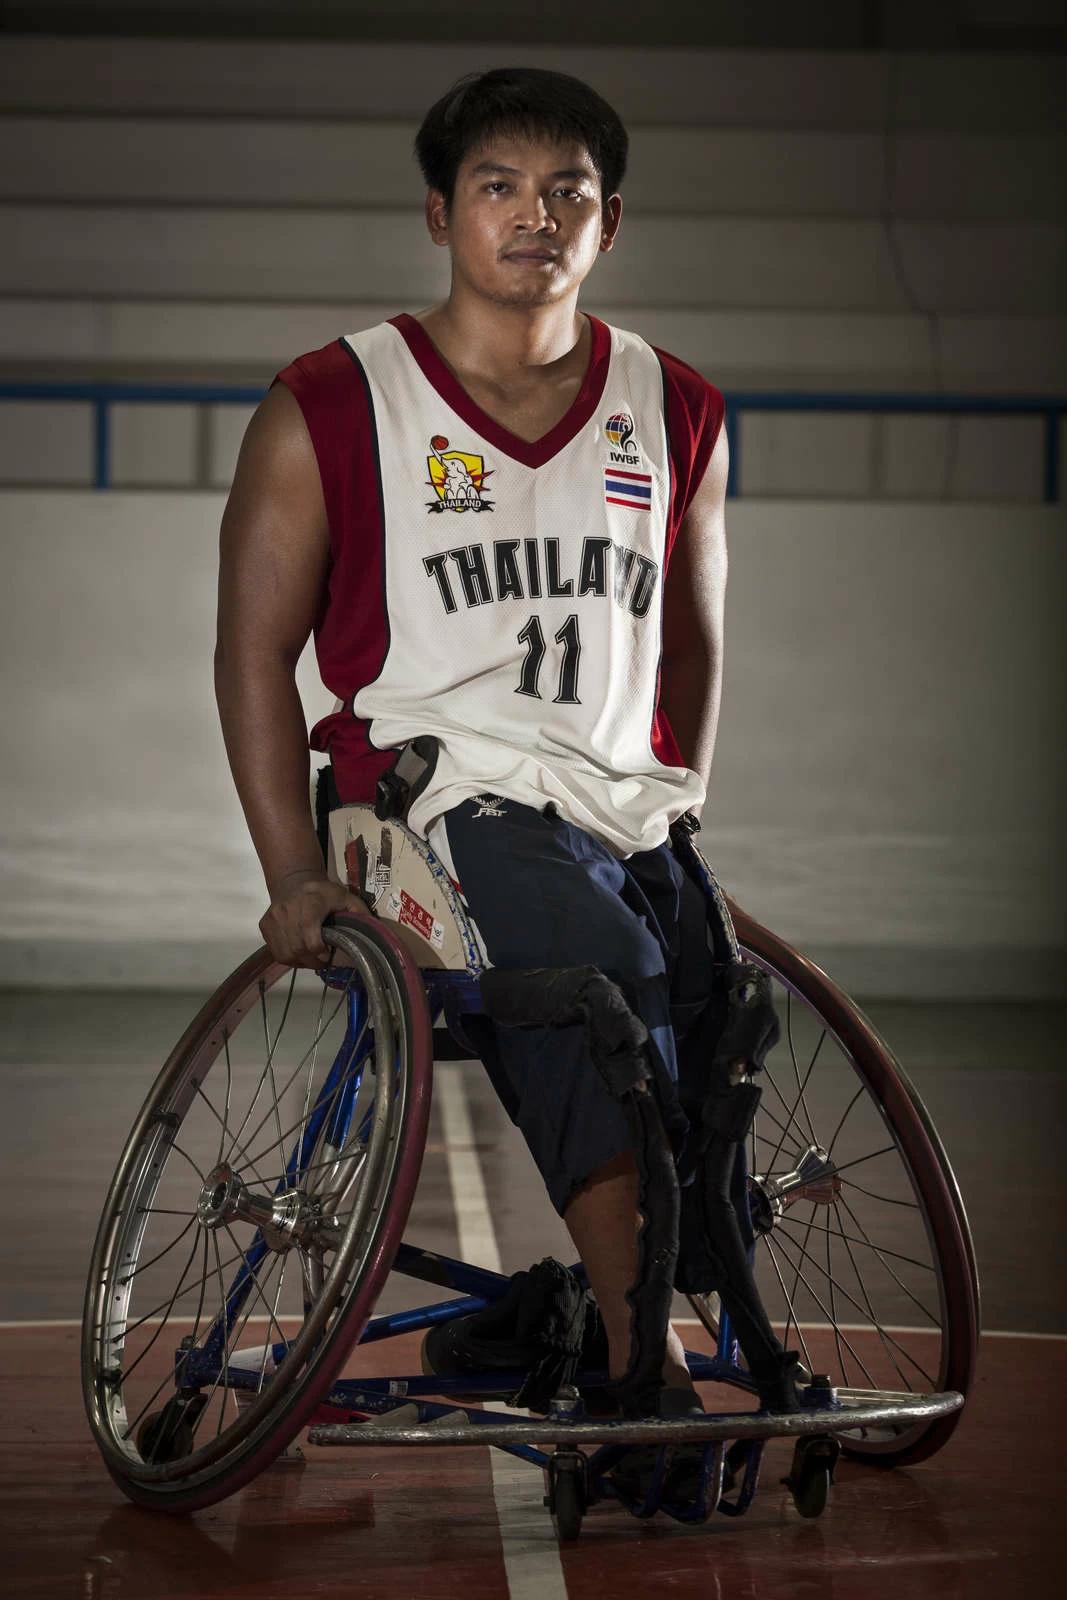 A member of Thailand’s national wheelchair basketball team is portrayed here at a government sports facility in Cholburi province about an hour and a half to the east of the Thai capital Bangkok. All the players recount tales of the terrible accidents that left them without a limb or paralyzed. Photo and story credits to Yvan Cohen.